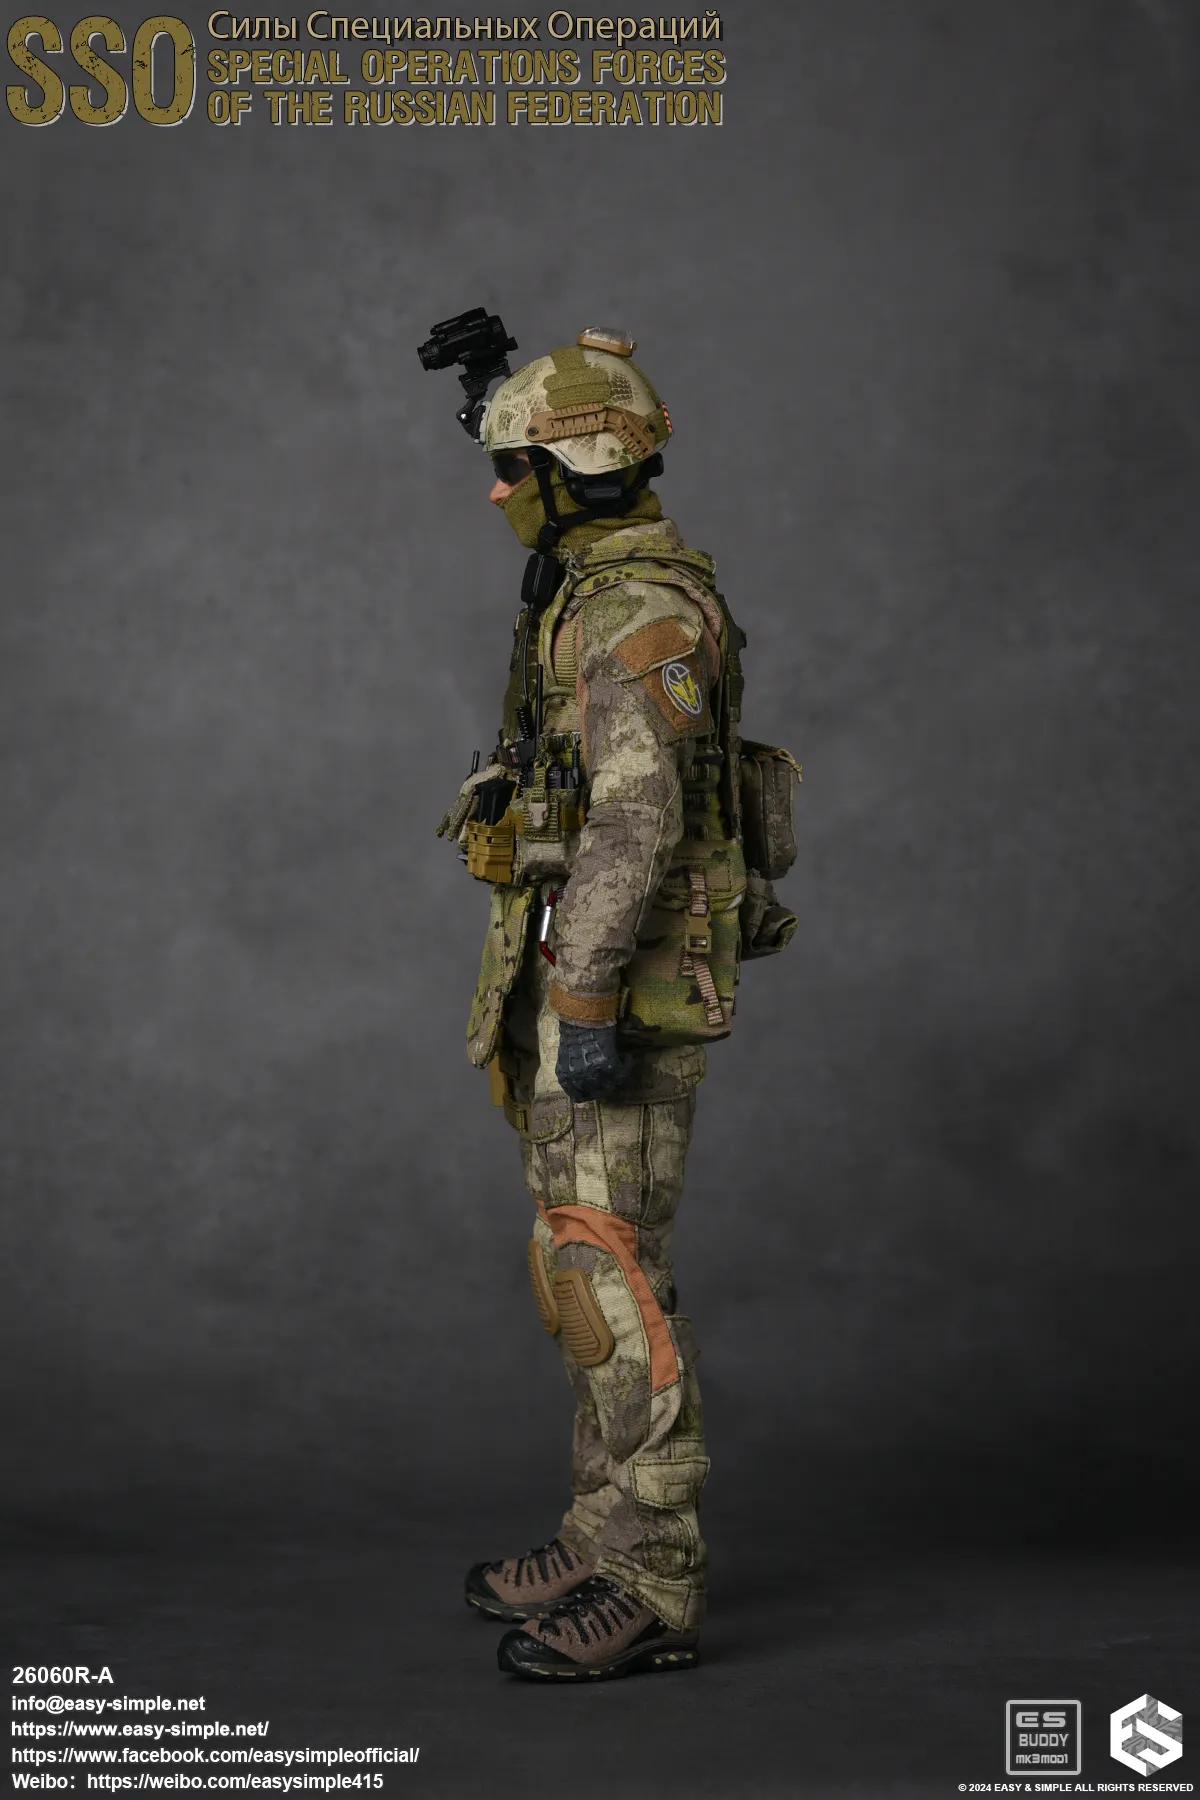 military - NEW PRODUCT: Easy&Simple 26060R-A Russian Special Operations Forces (SSO) Format,webp